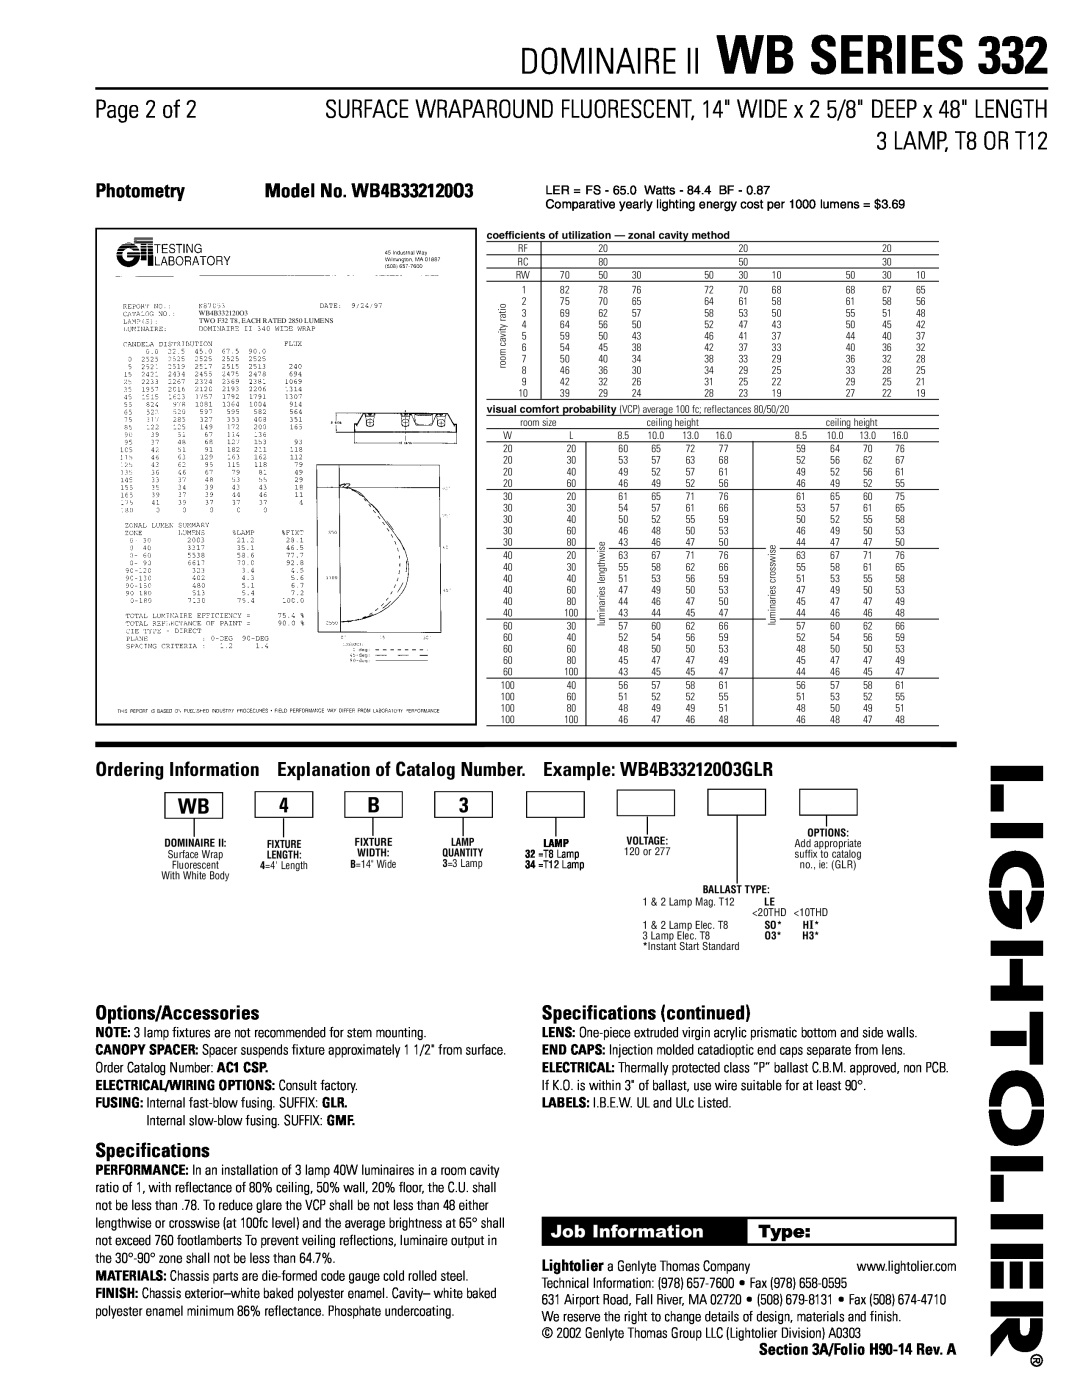 Lightolier WB Series 332 Page 2 of, Photometry, Options/Accessories, Specifications continued, Model No. WB4B332120O3 